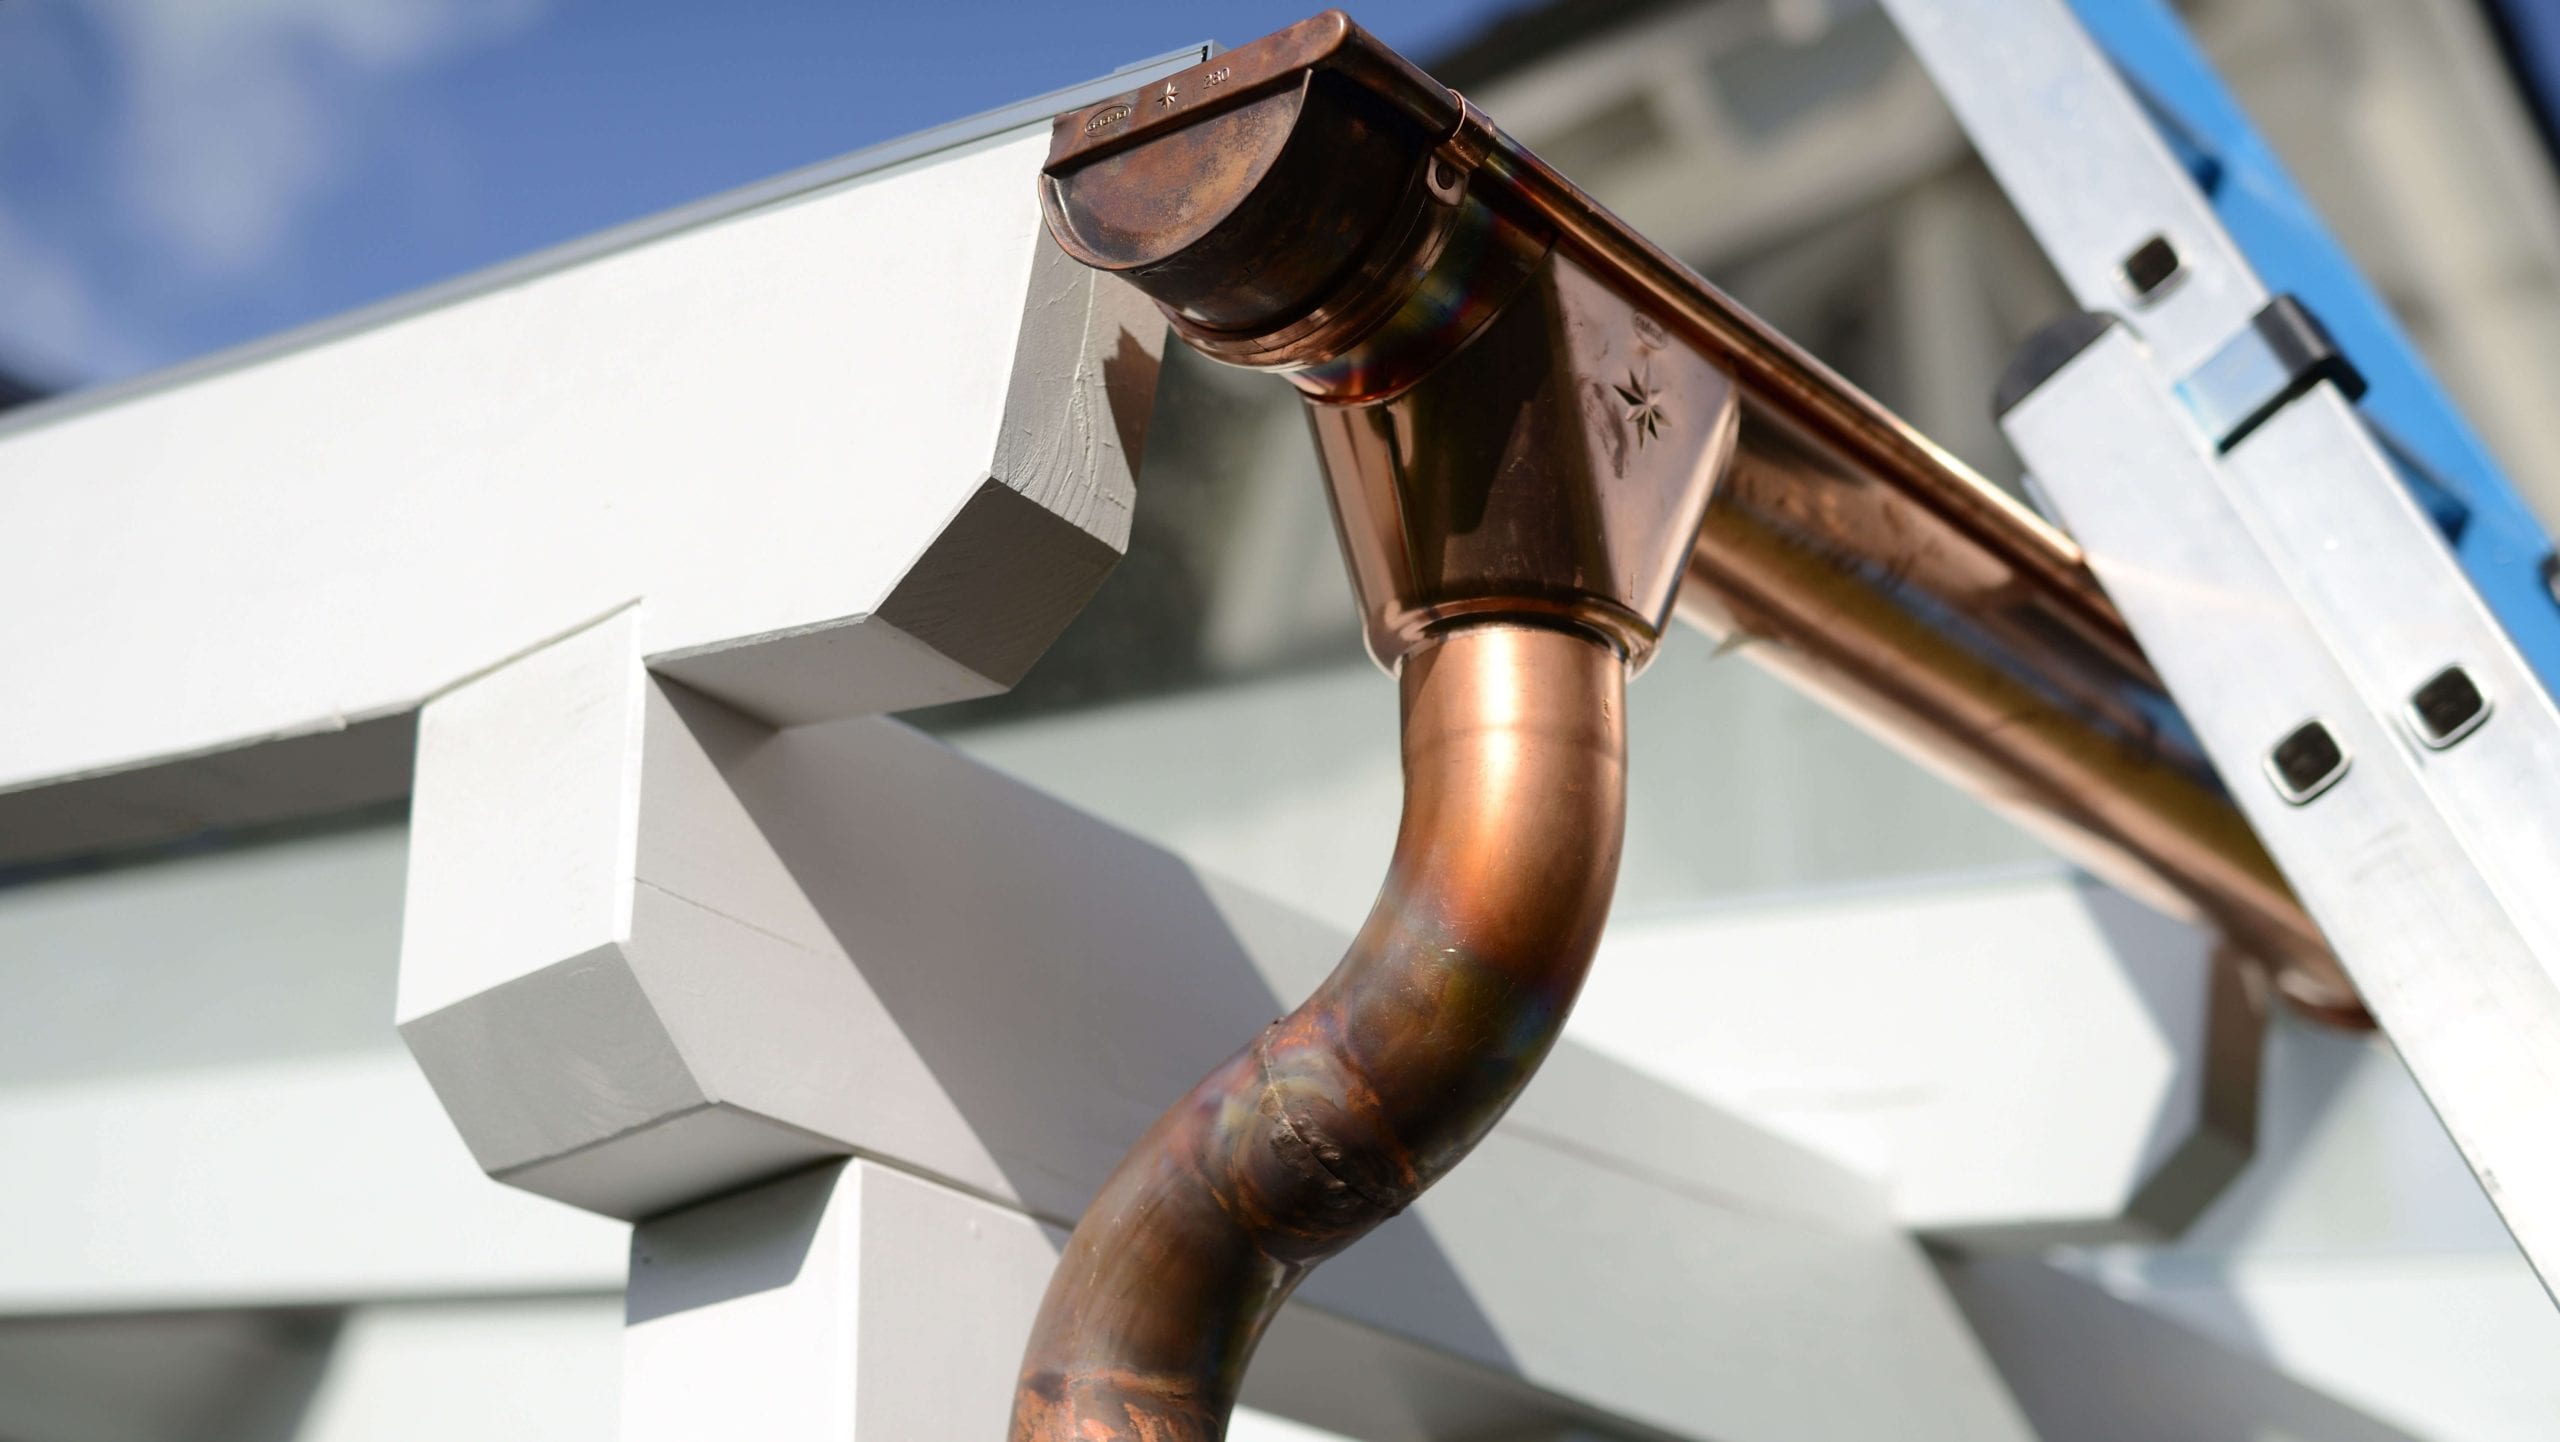 Make your property stand out with copper gutters. Contact for gutter installation in Anderson